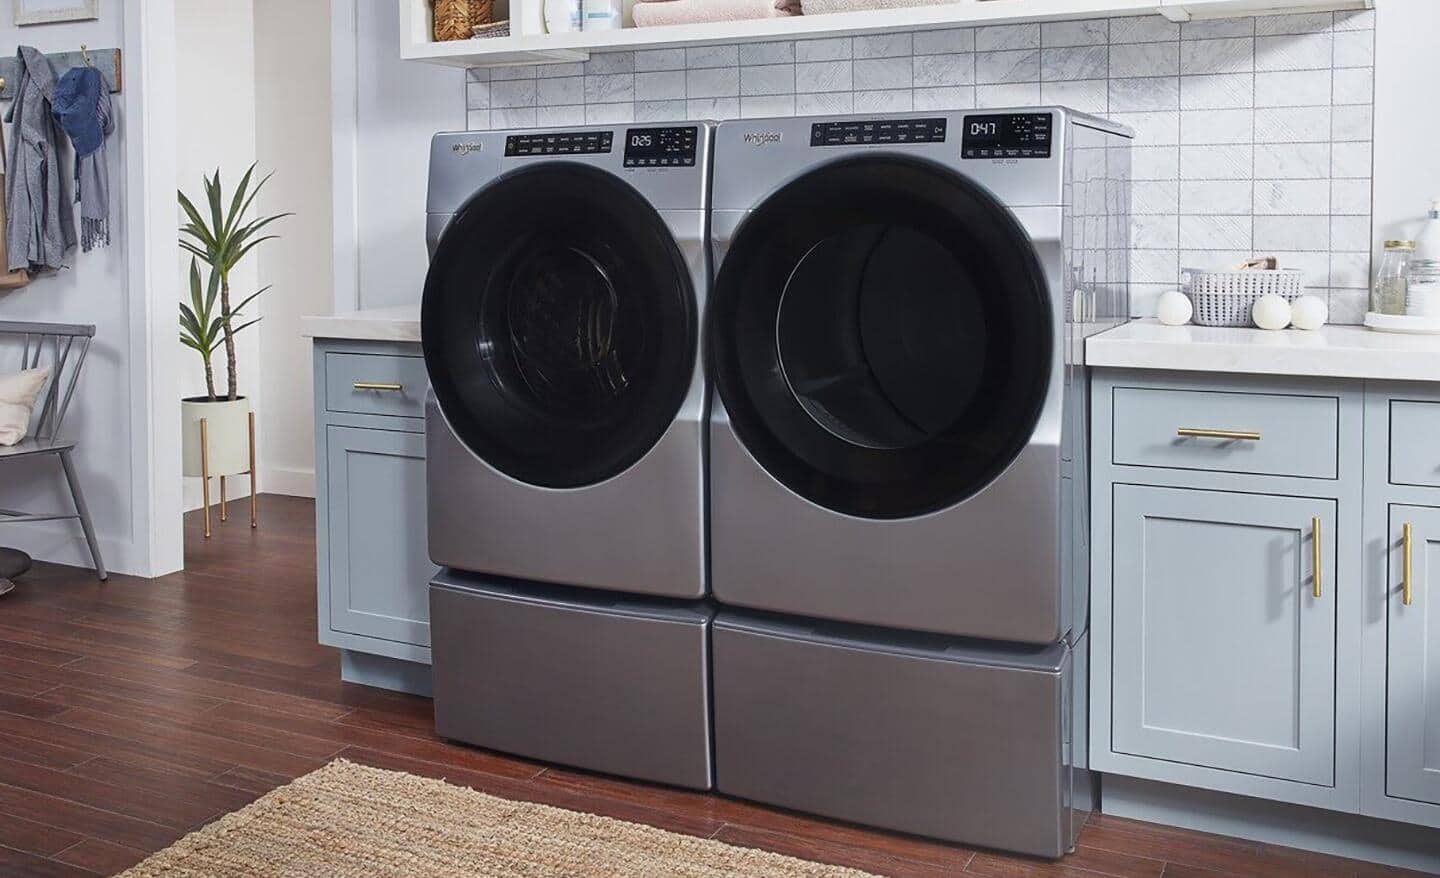 A front load washing machine and dryer installed in a kitchen.